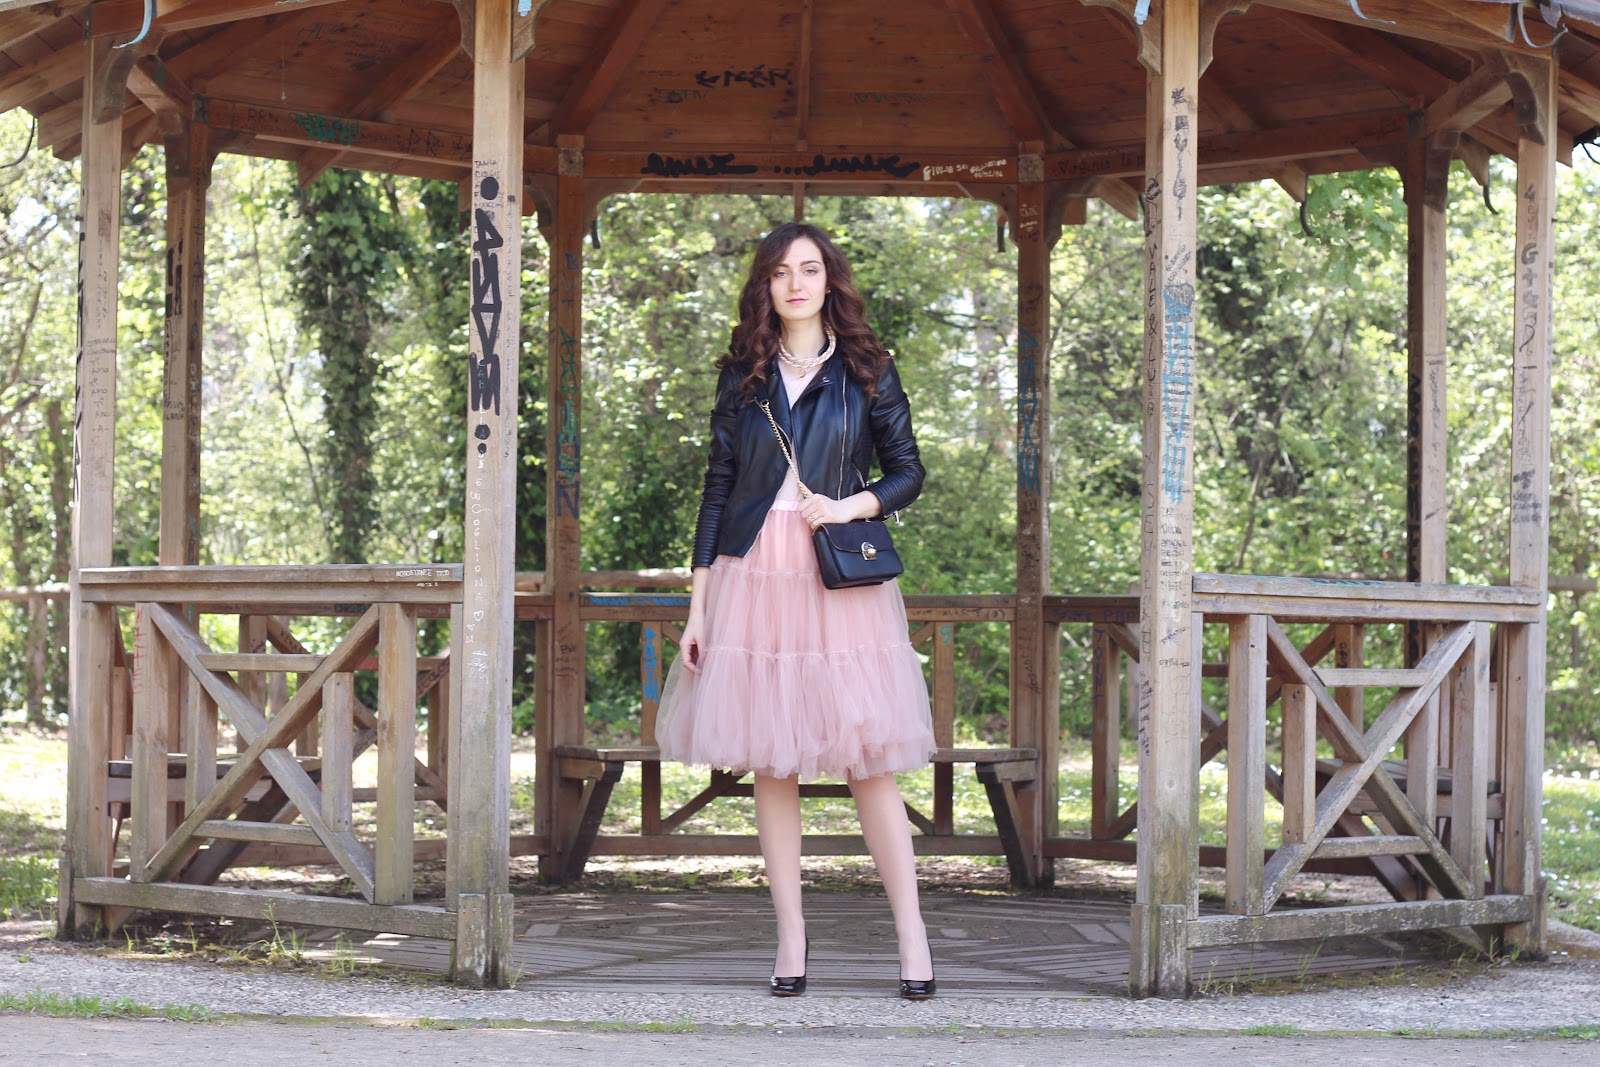 fashion style blogger italian girl italy ootd outfit vogue glamour pescara tulle skirt gonna rosa pink chic wish collana charme bijoux necklace zara heels shoes scarpe tacchi bag borsa jacket leather giacca chiodo pelle look rock chic